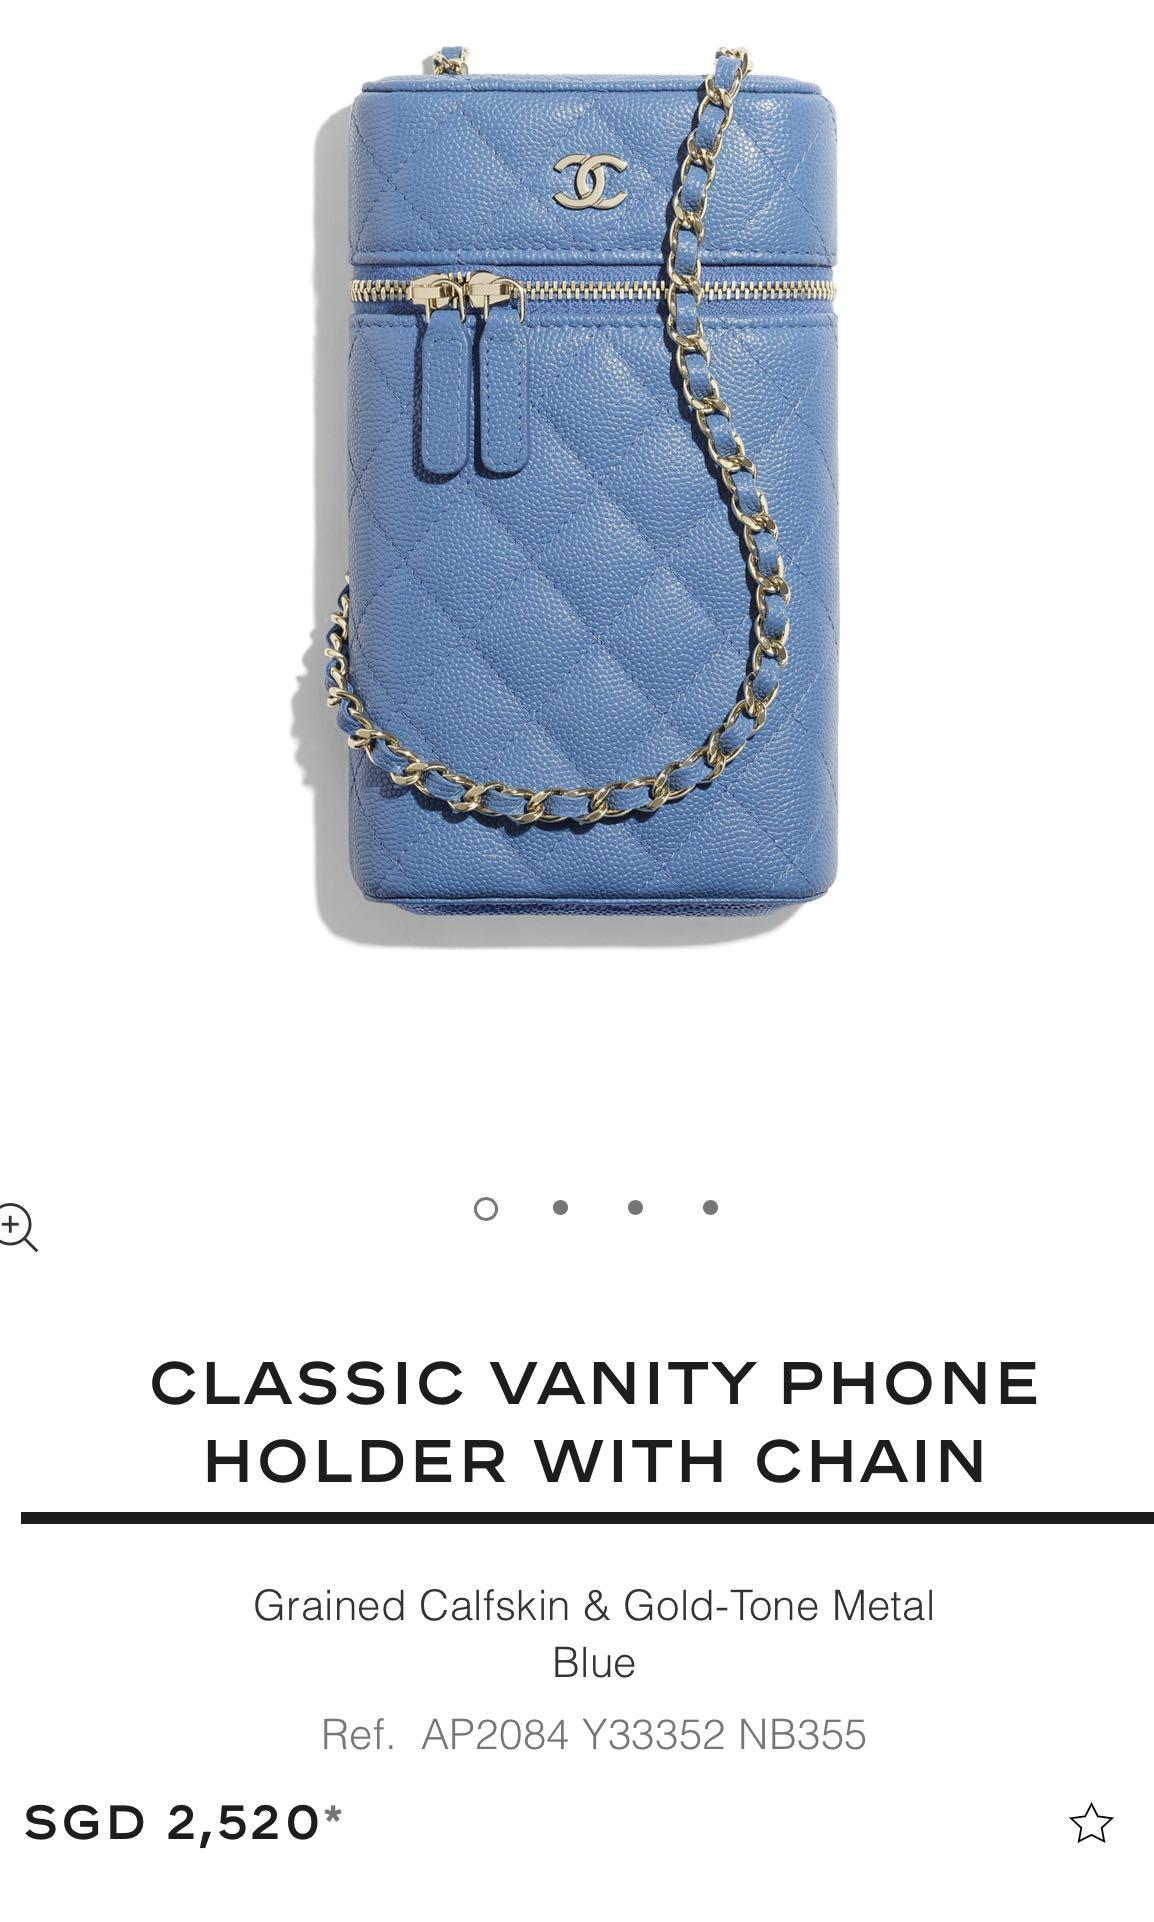 21P Chanel classic vanity phone holder with chain